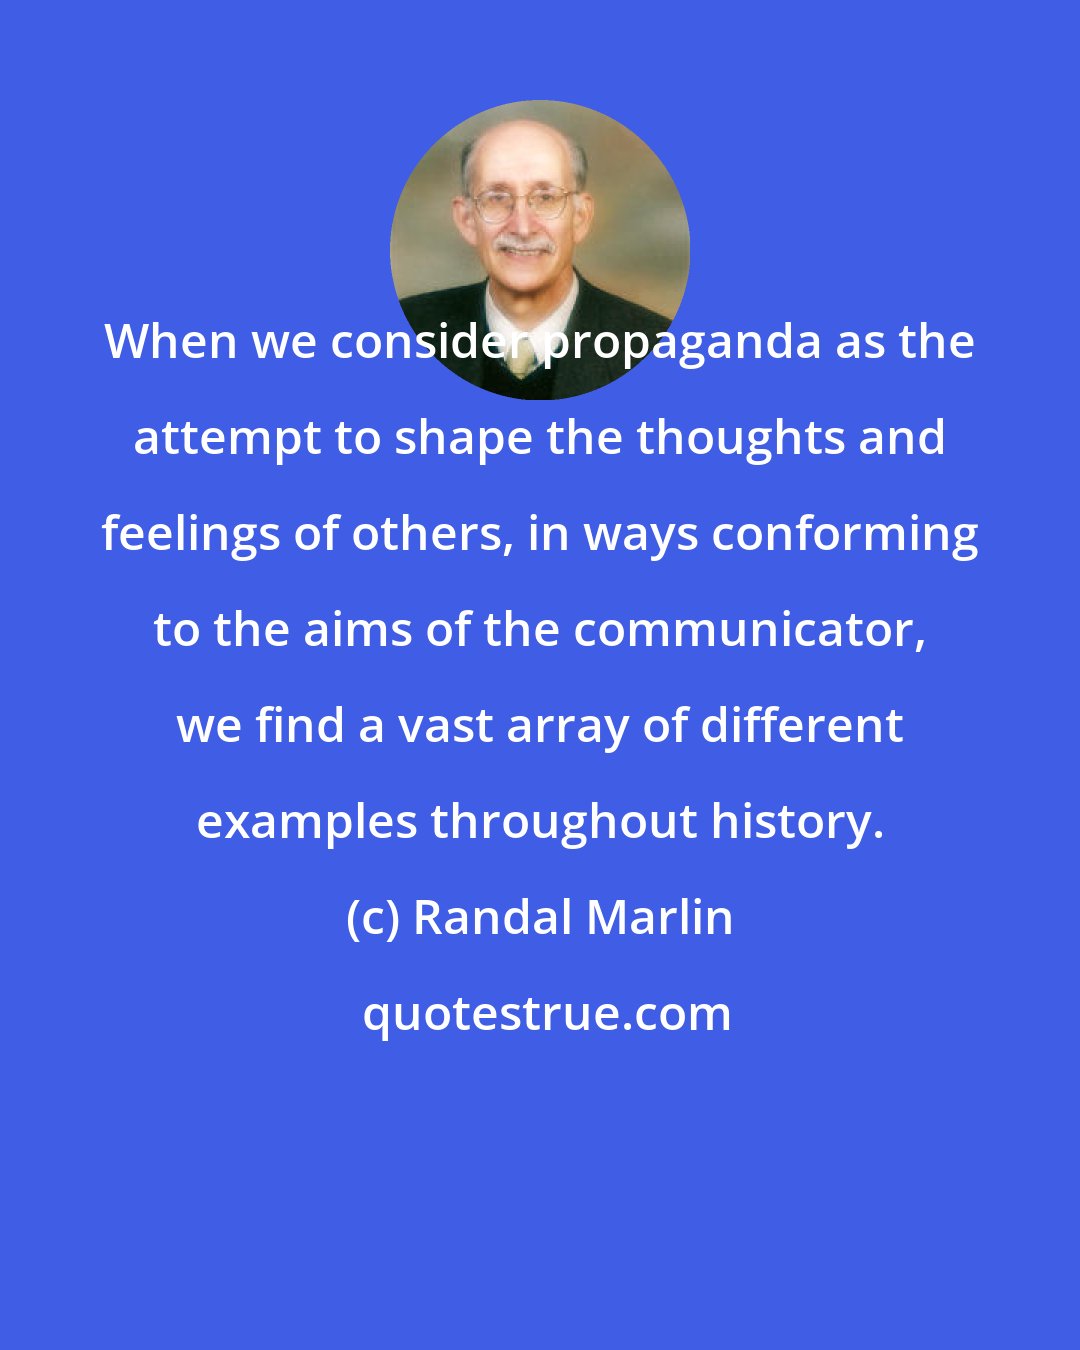 Randal Marlin: When we consider propaganda as the attempt to shape the thoughts and feelings of others, in ways conforming to the aims of the communicator, we find a vast array of different examples throughout history.